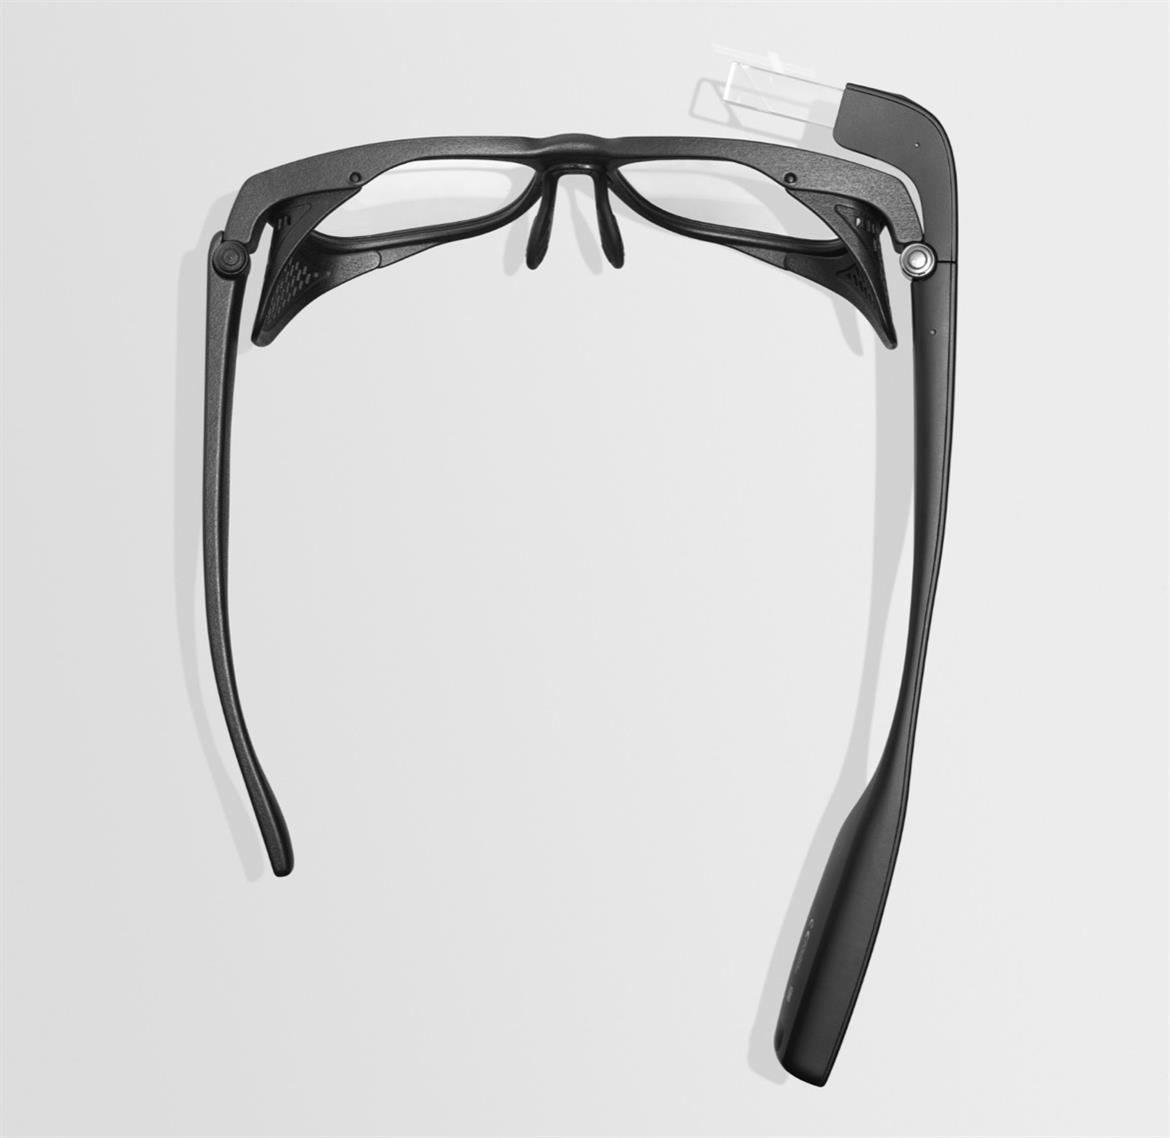 Next-Gen Android-Fueled Google Glass Takes Fight To HoloLens With $999 Price Tag